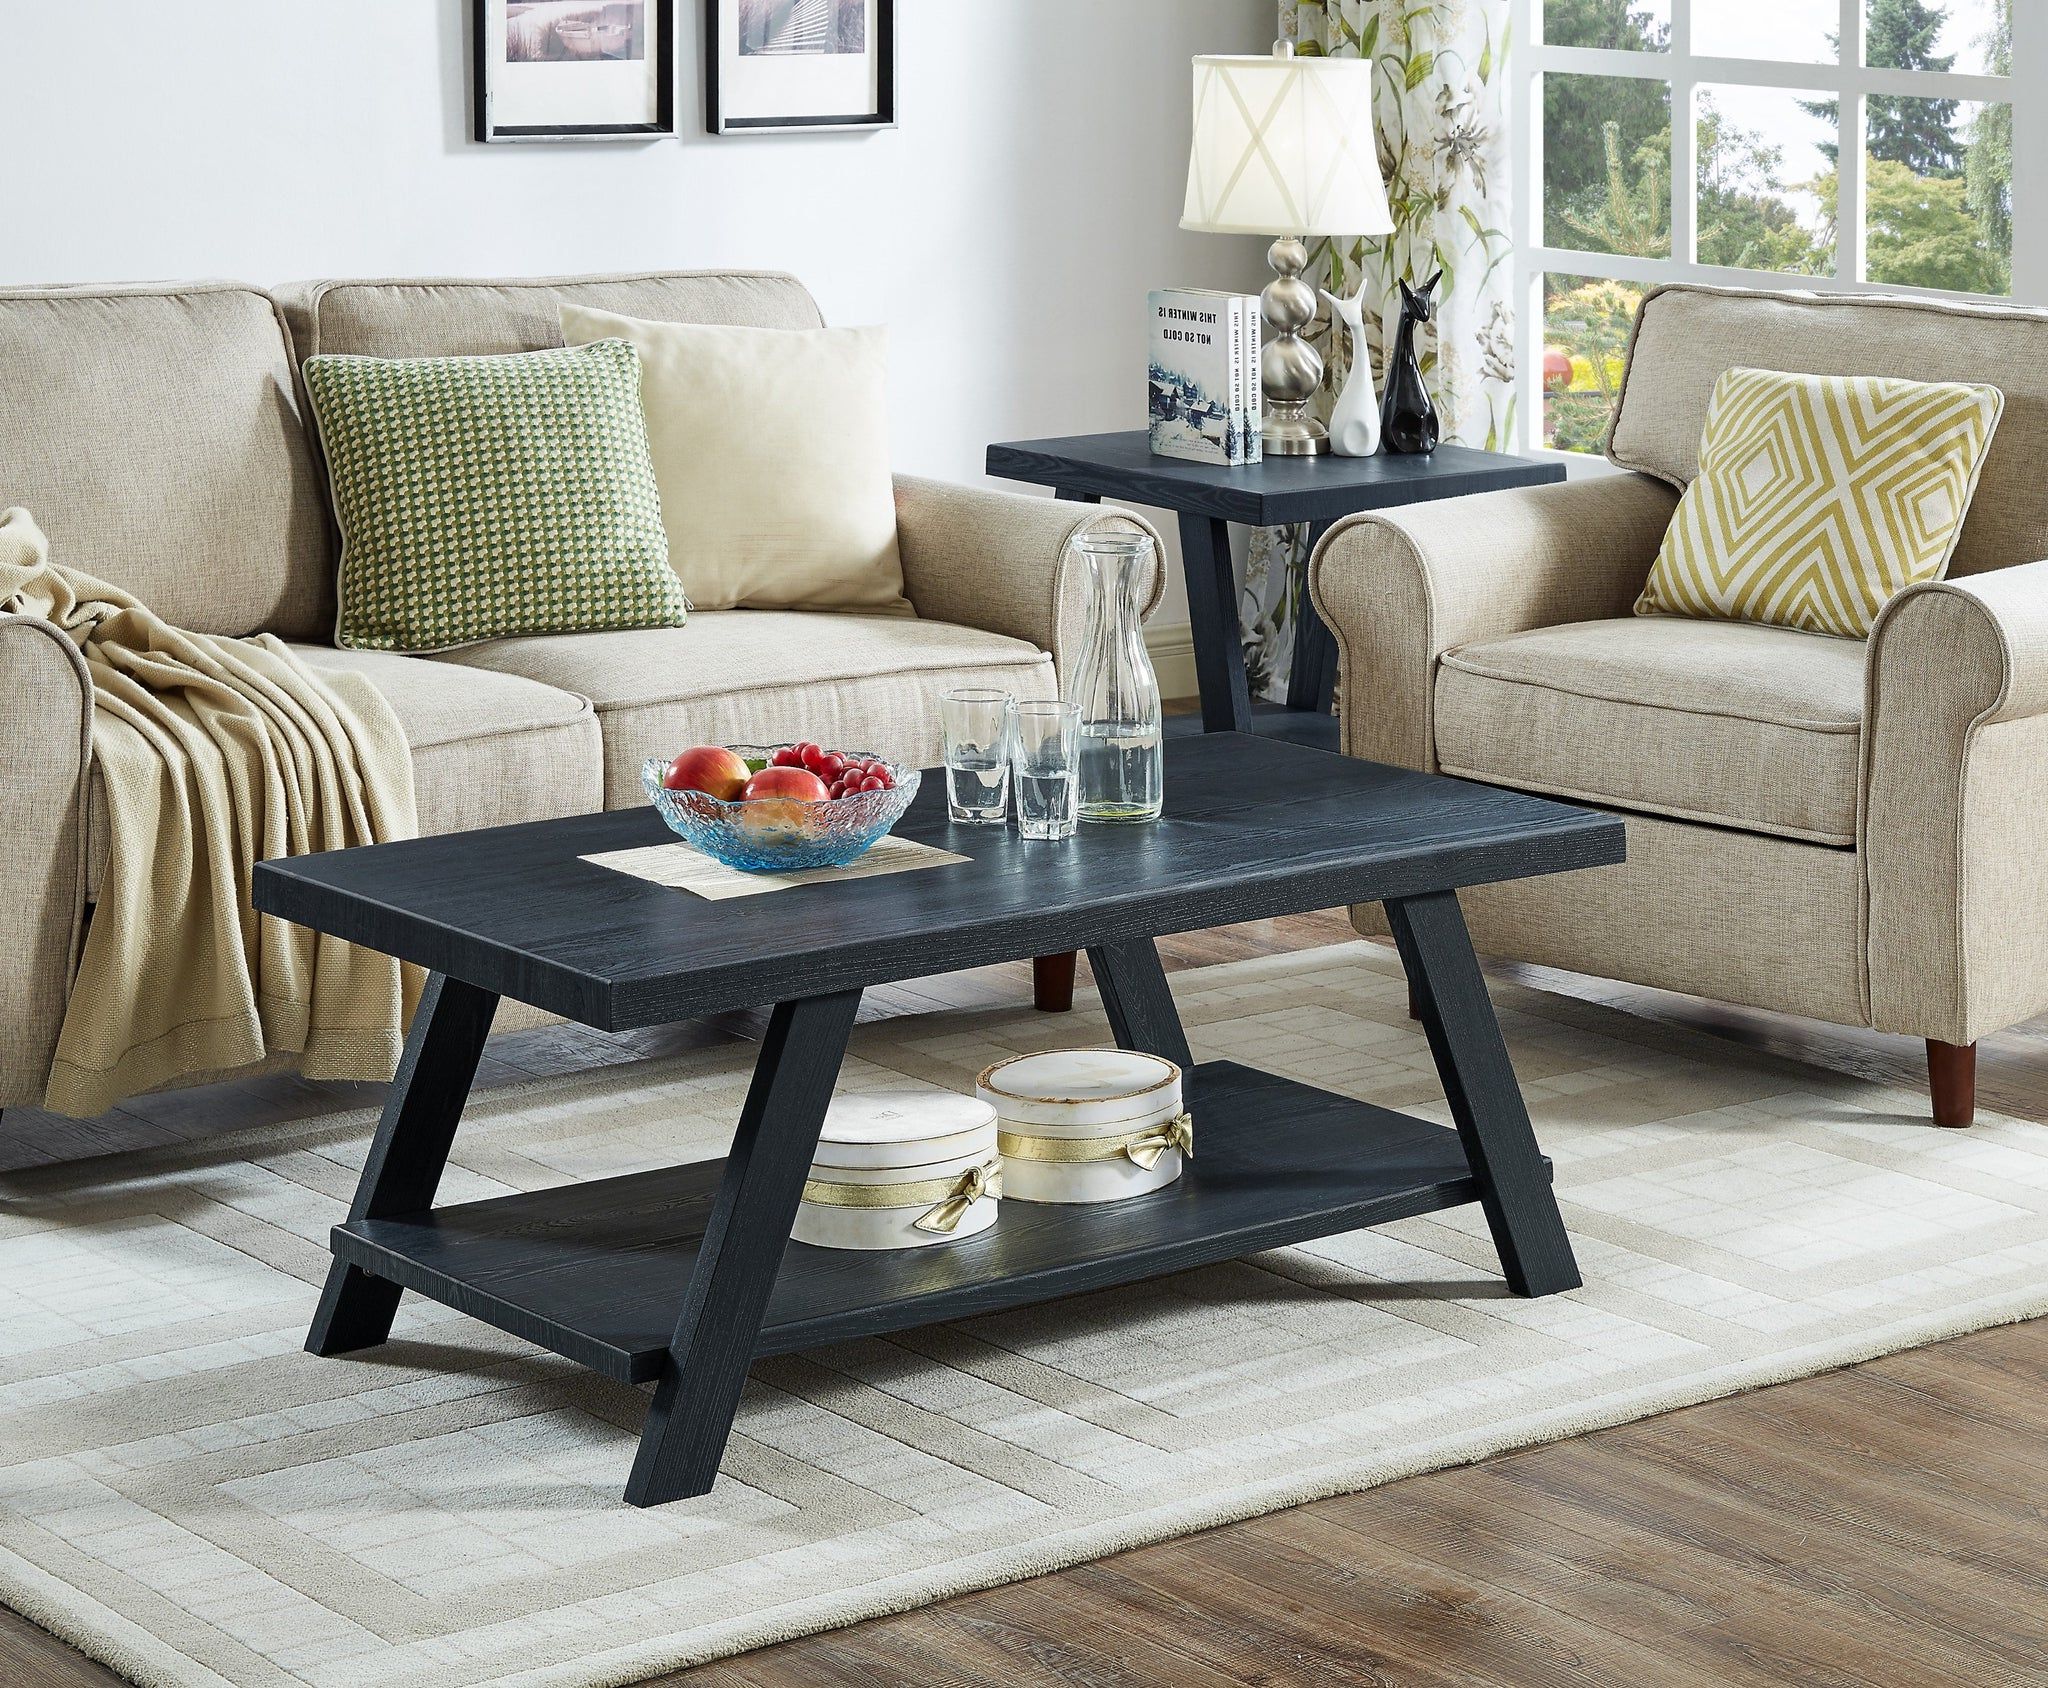 Athens Contemporary Replicated Wood Shelf Coffee Set Table In Black Fi Pertaining To Most Recent Pemberly Row Replicated Wood Coffee Tables (View 6 of 15)